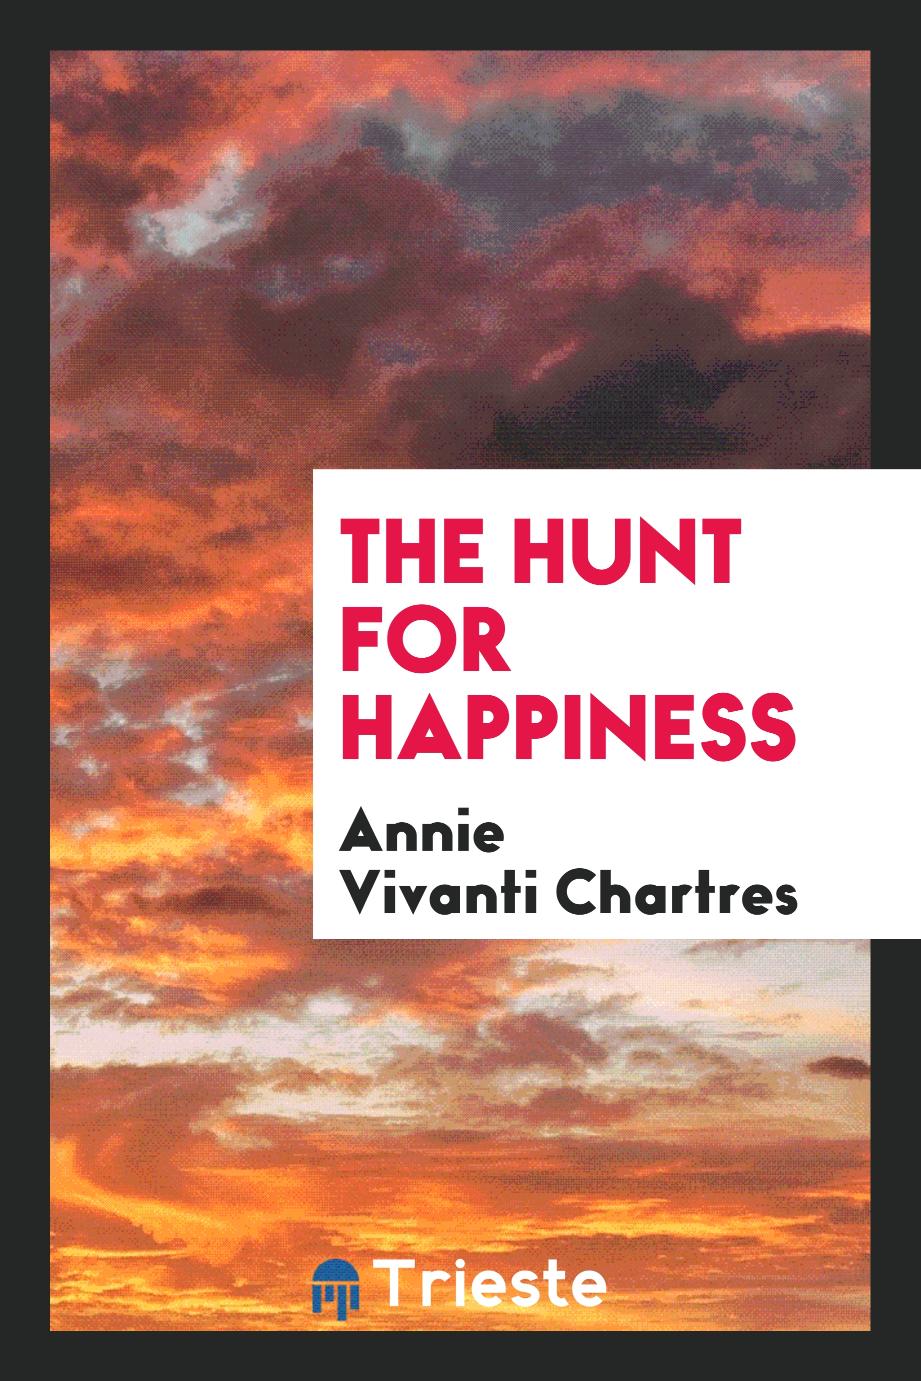 The Hunt for Happiness